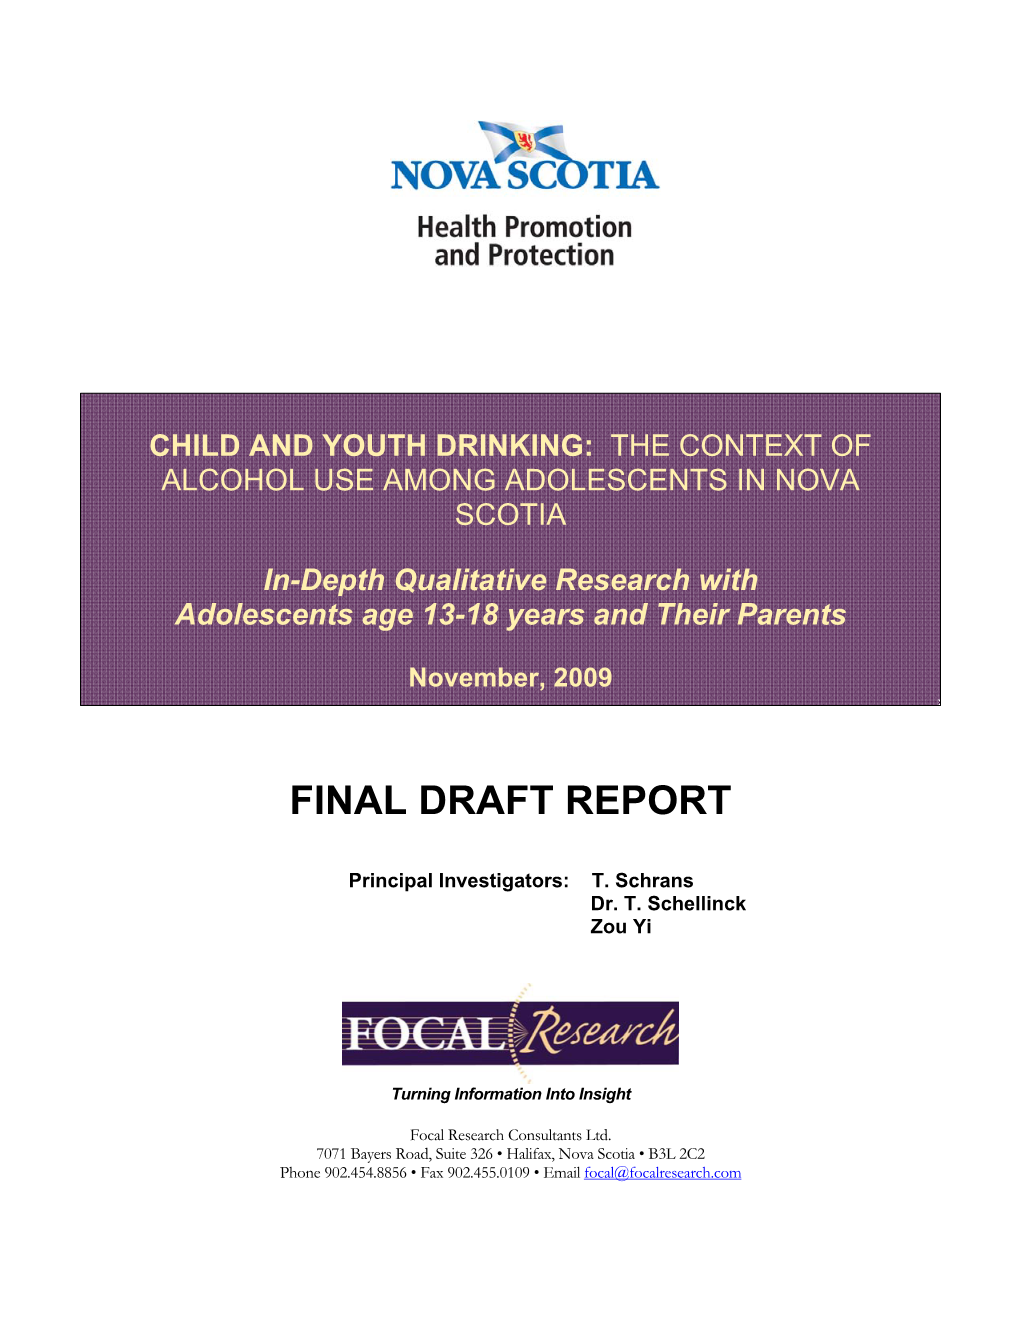 Child and Youth Drinking: the Context of Alcohol Use Among Adolescents in Nova Scotia